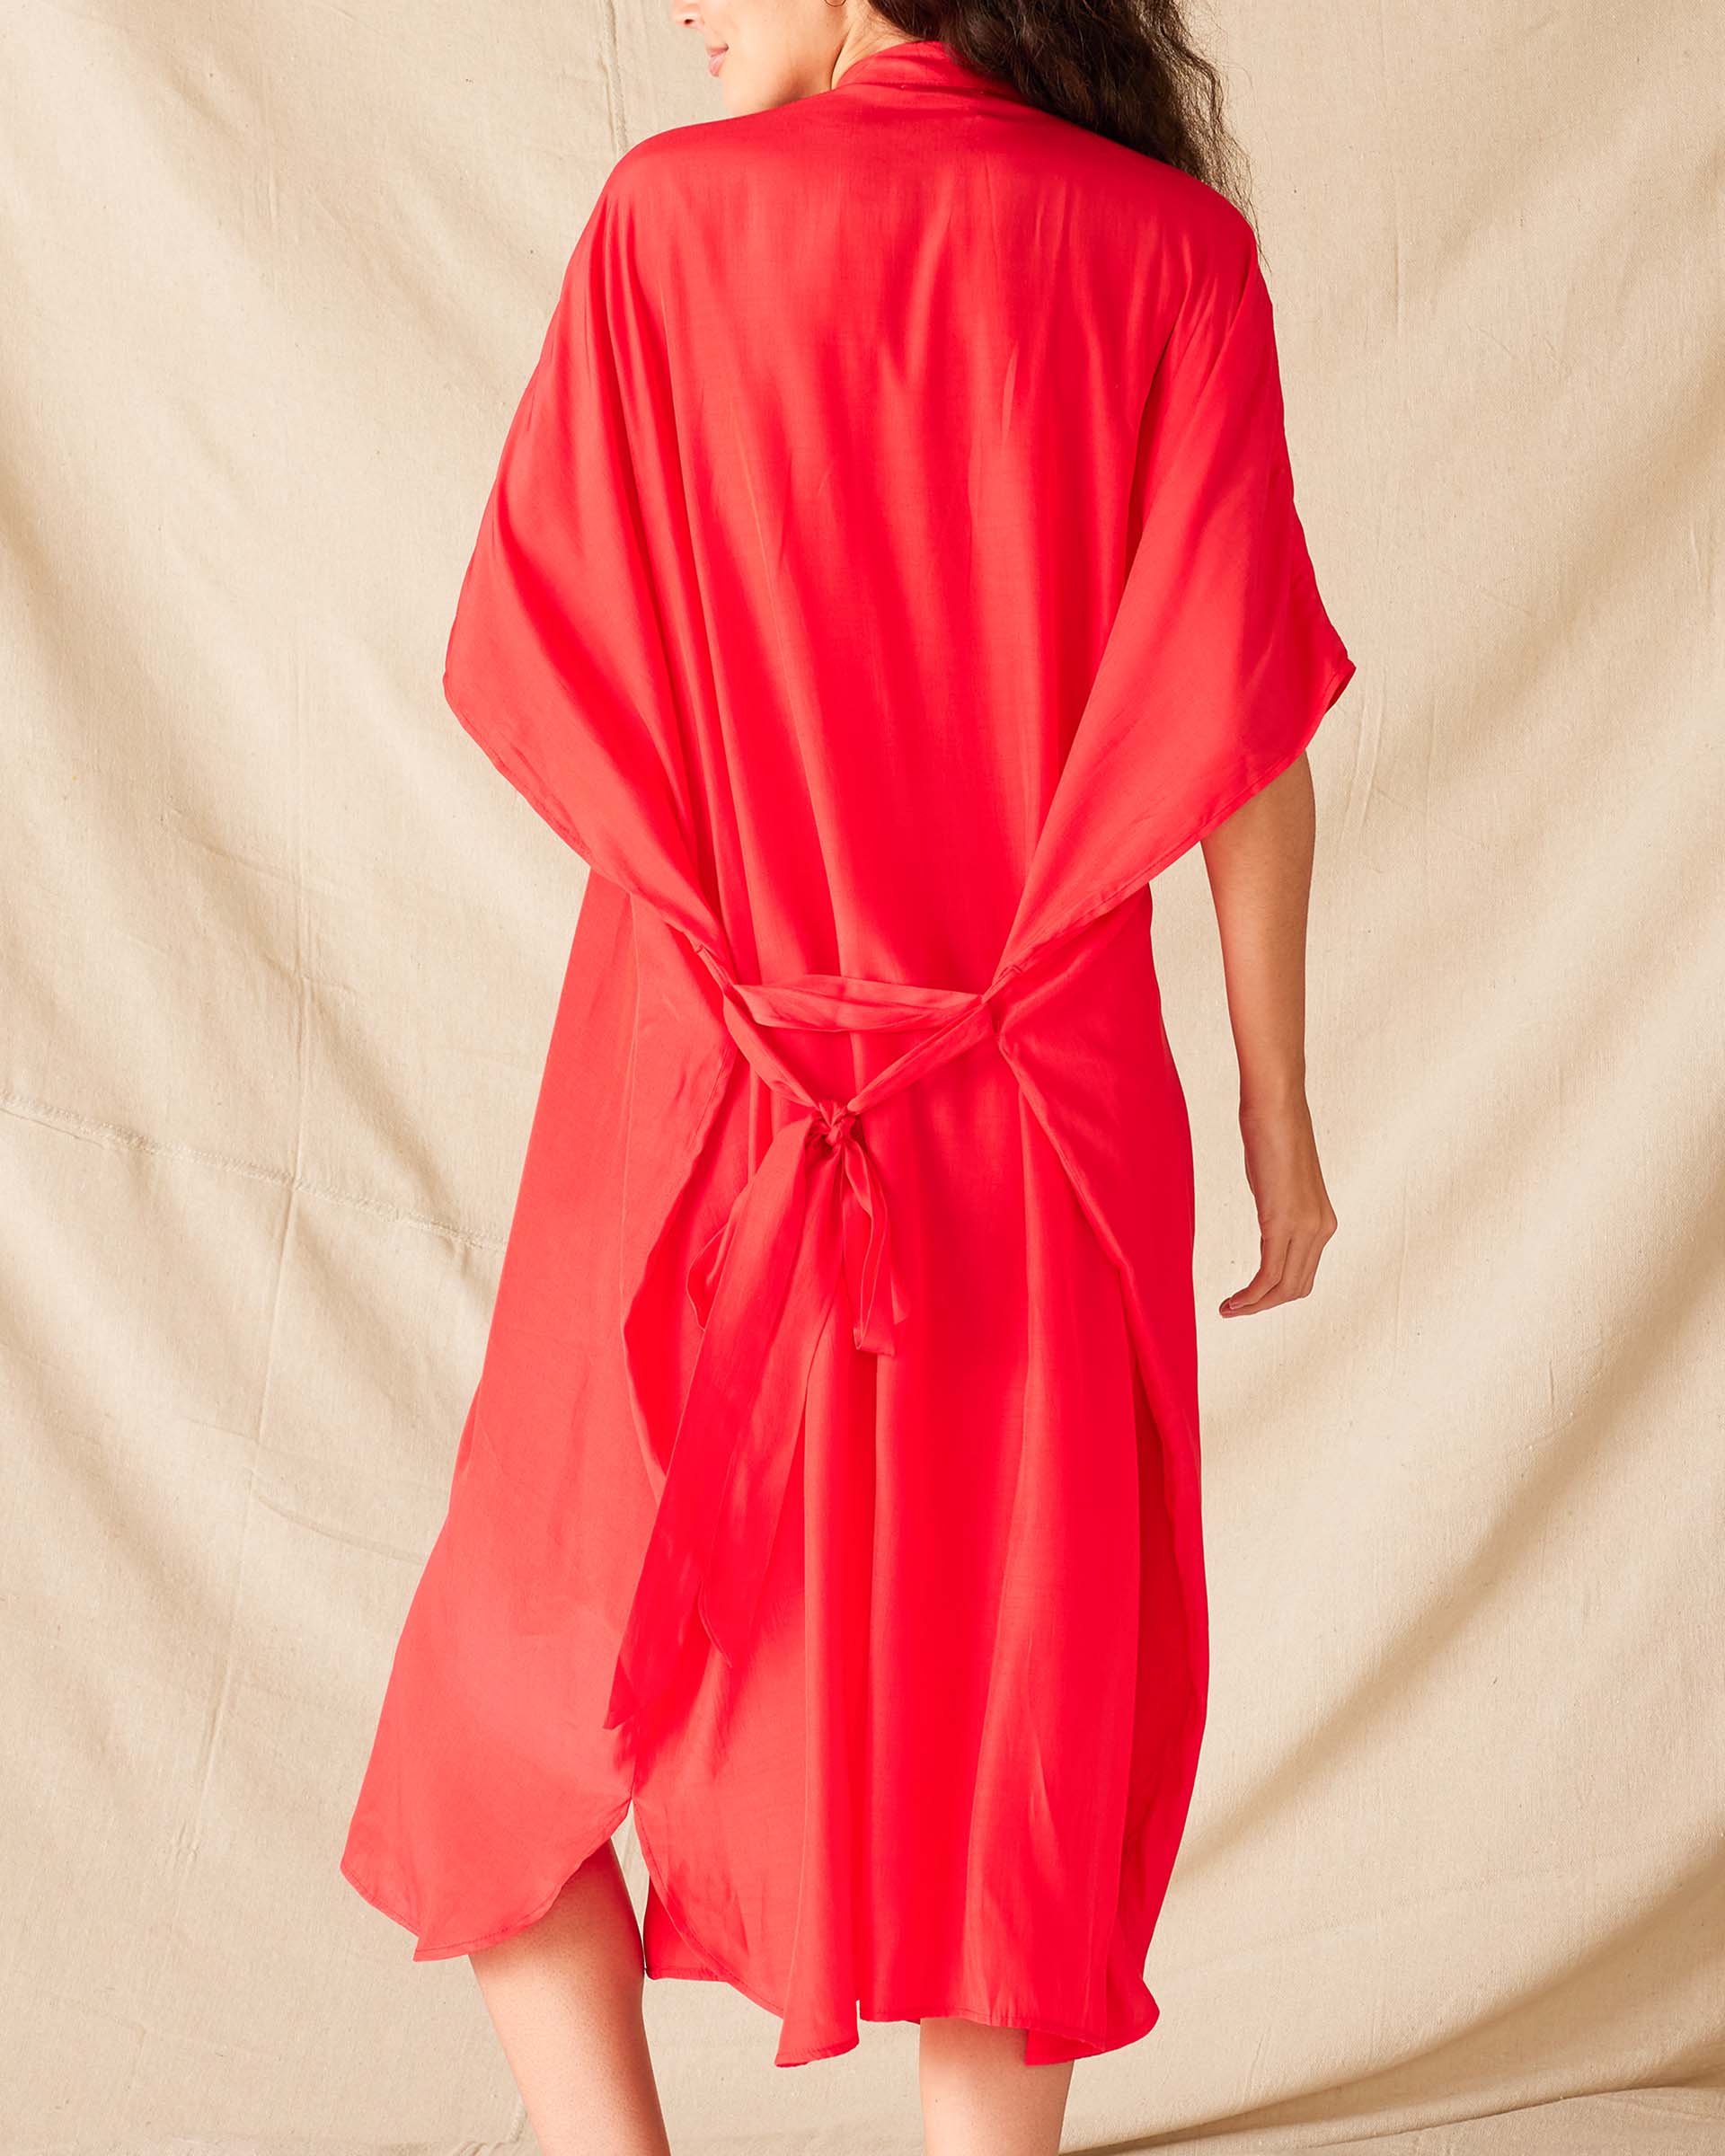 Women's Red Mallorca Kaftan Dress and Coverup With Button-up Front Sleeveless Drop Shoulder and Removable Self Belt Rear View